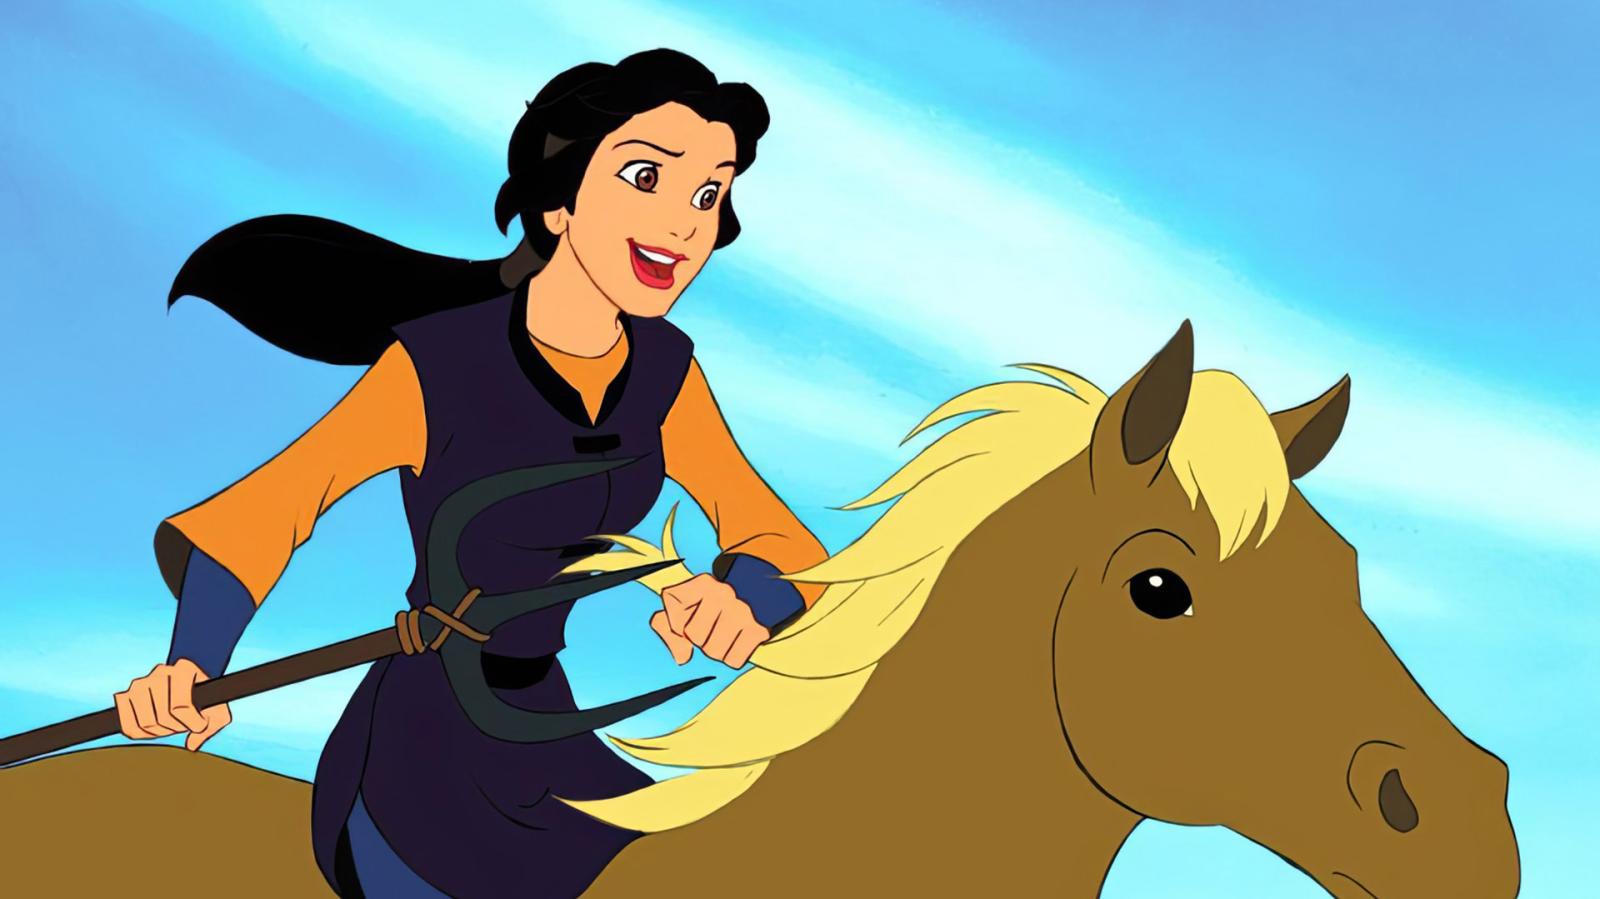 10 Underrated Animated Movies from the '90s You've Missed - image 3